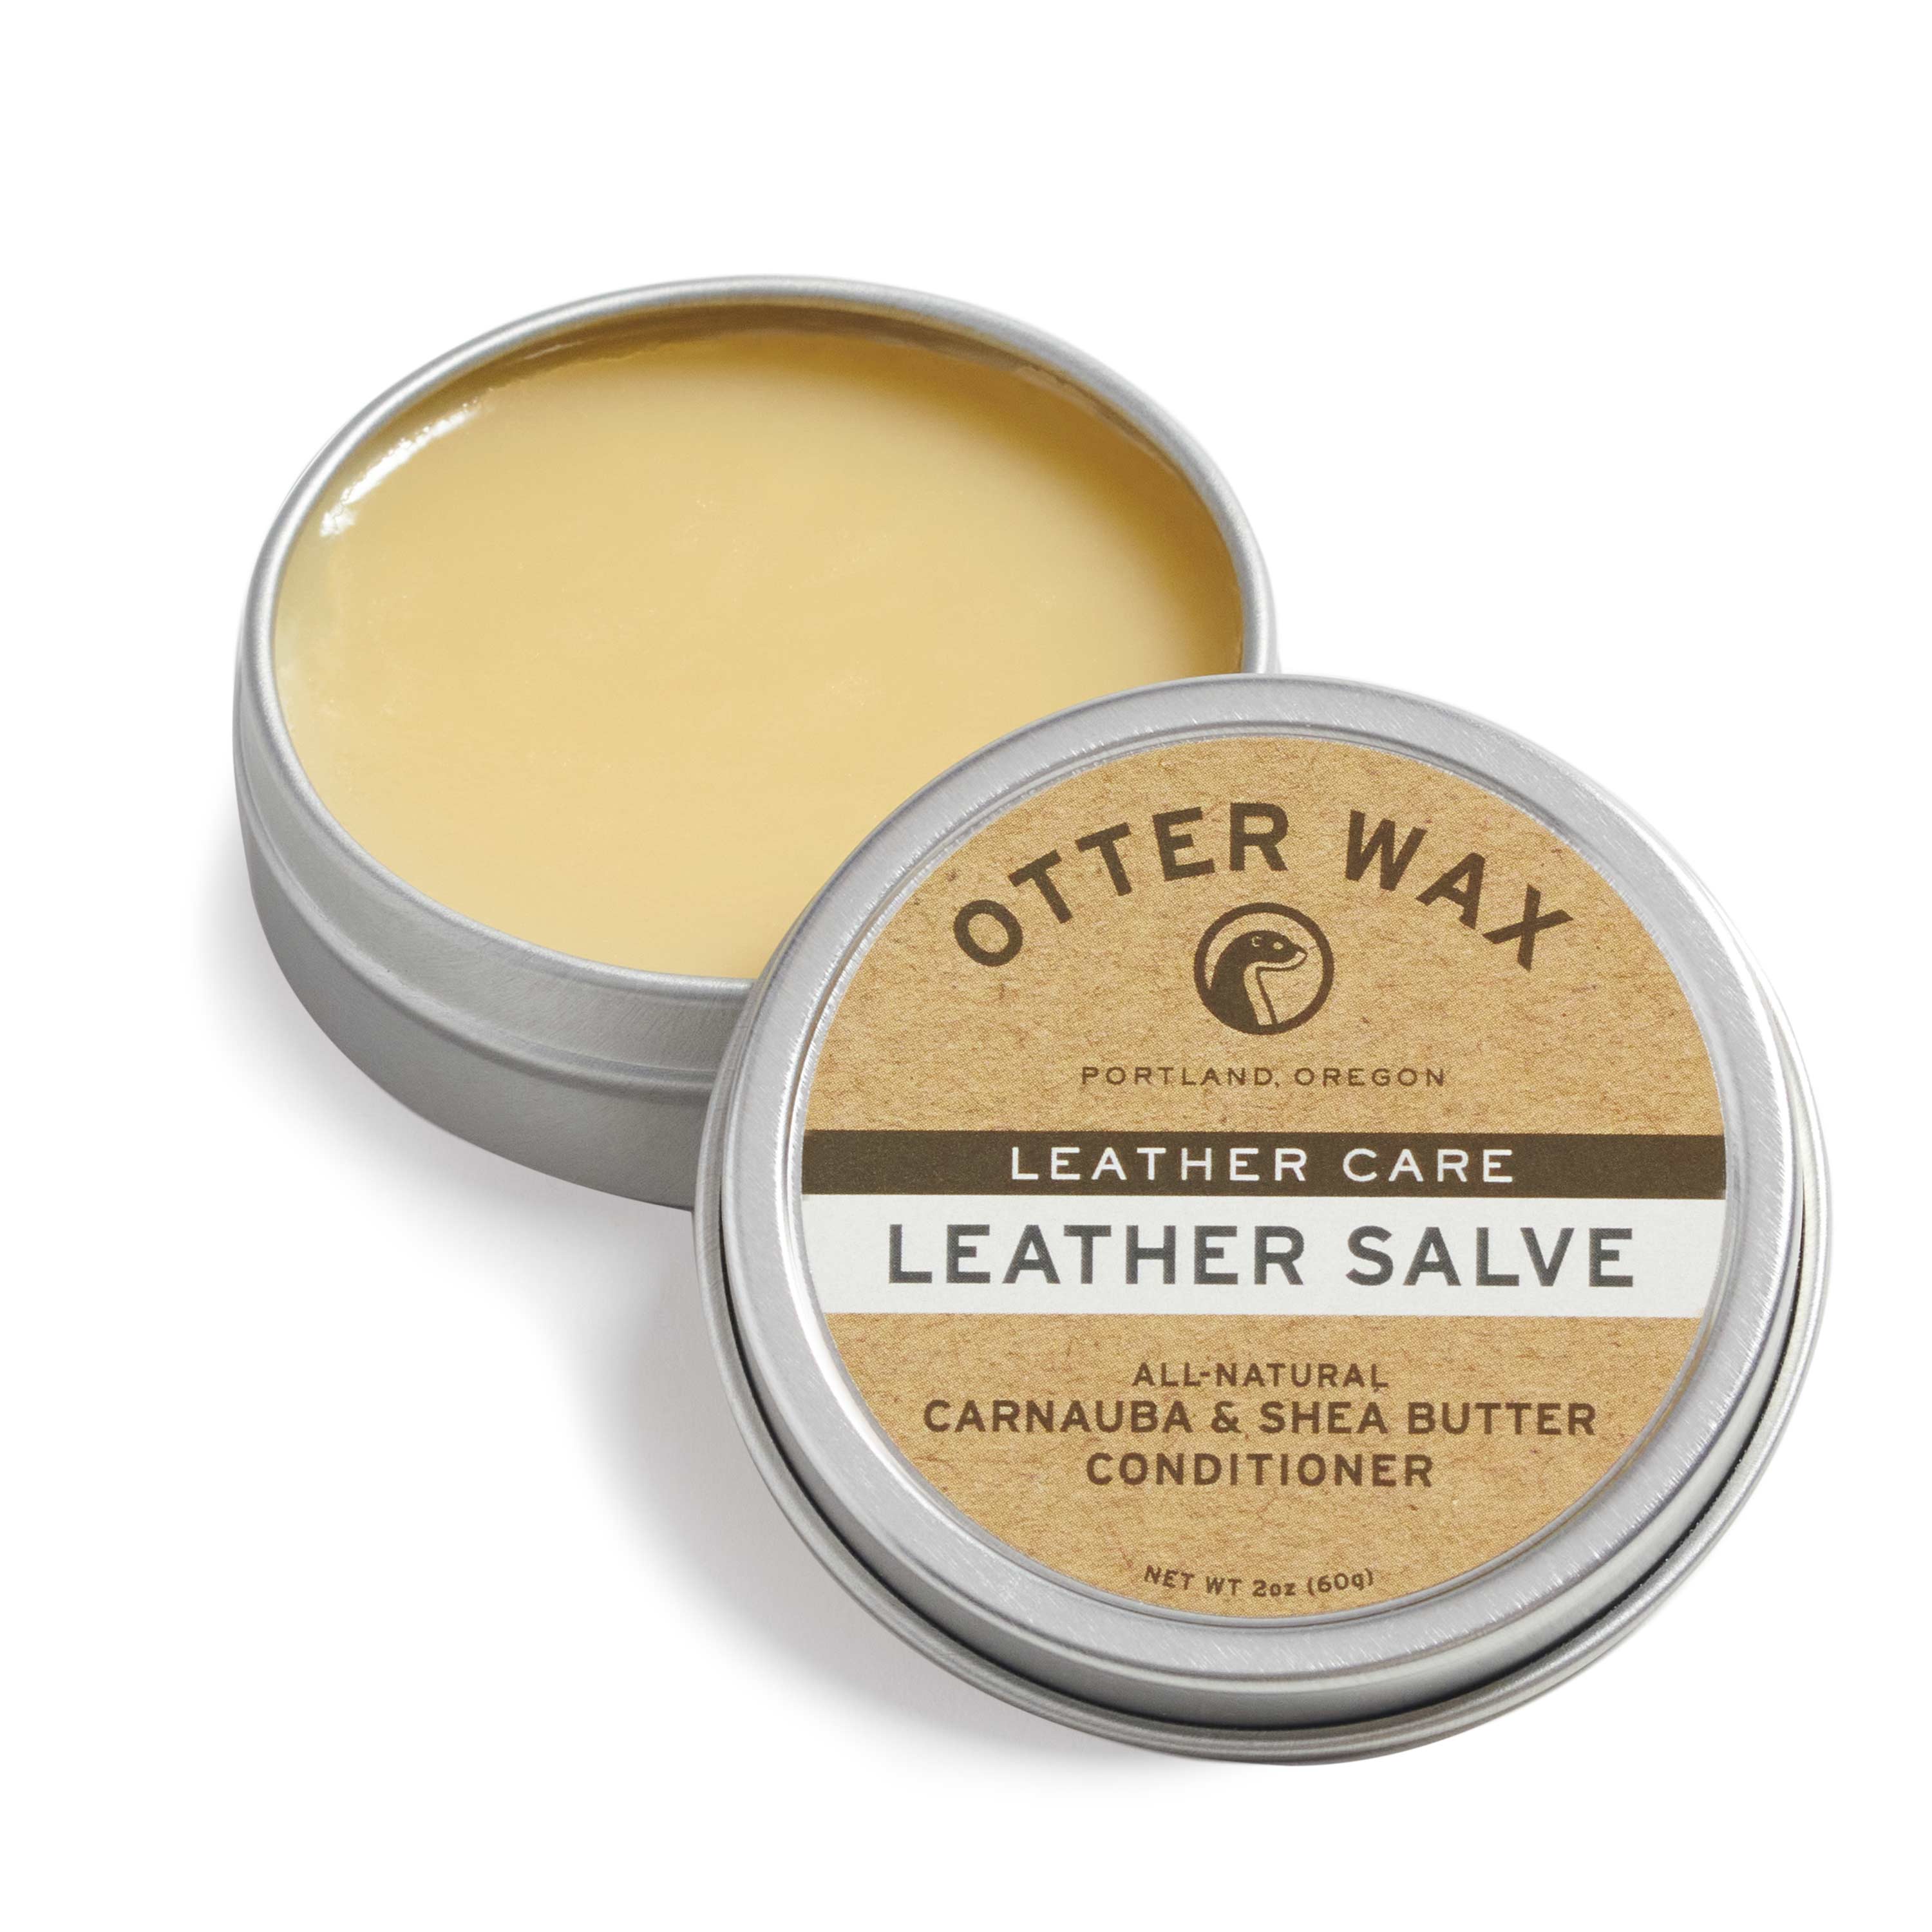 Otter Wax, Natural Water Resistance for Canvas Fabric – Craft and Lore